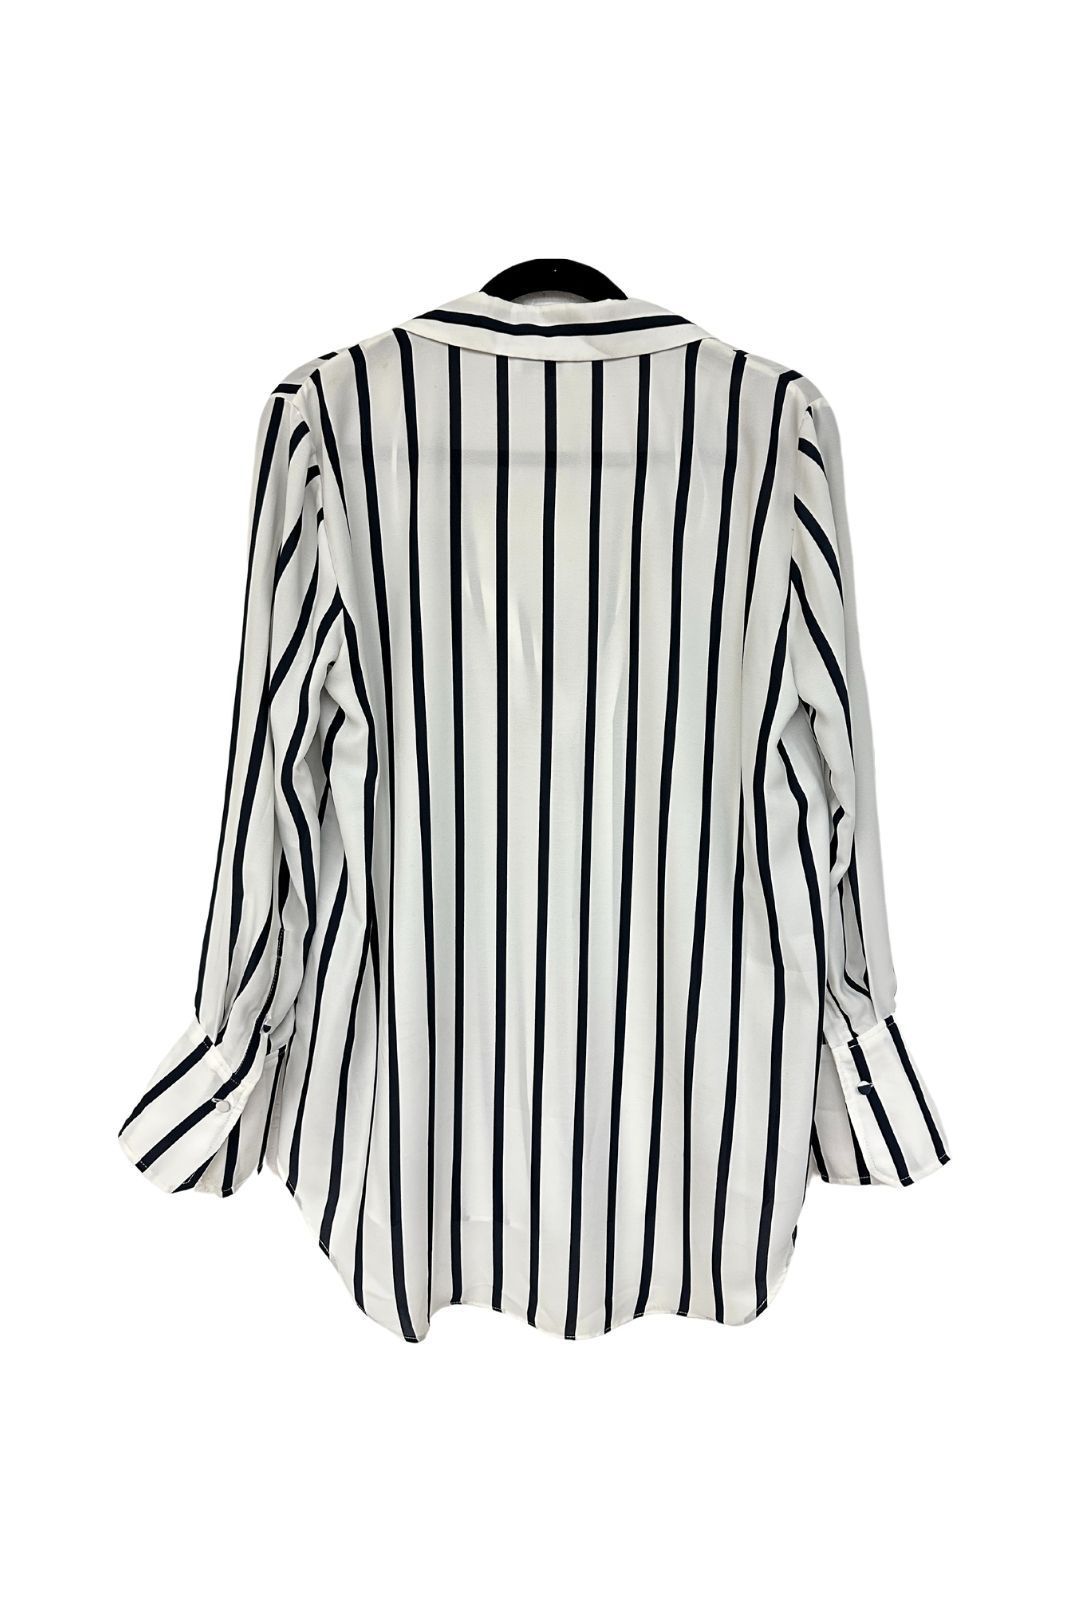 Witchery Black and White Striped Long Sleeve Shirt